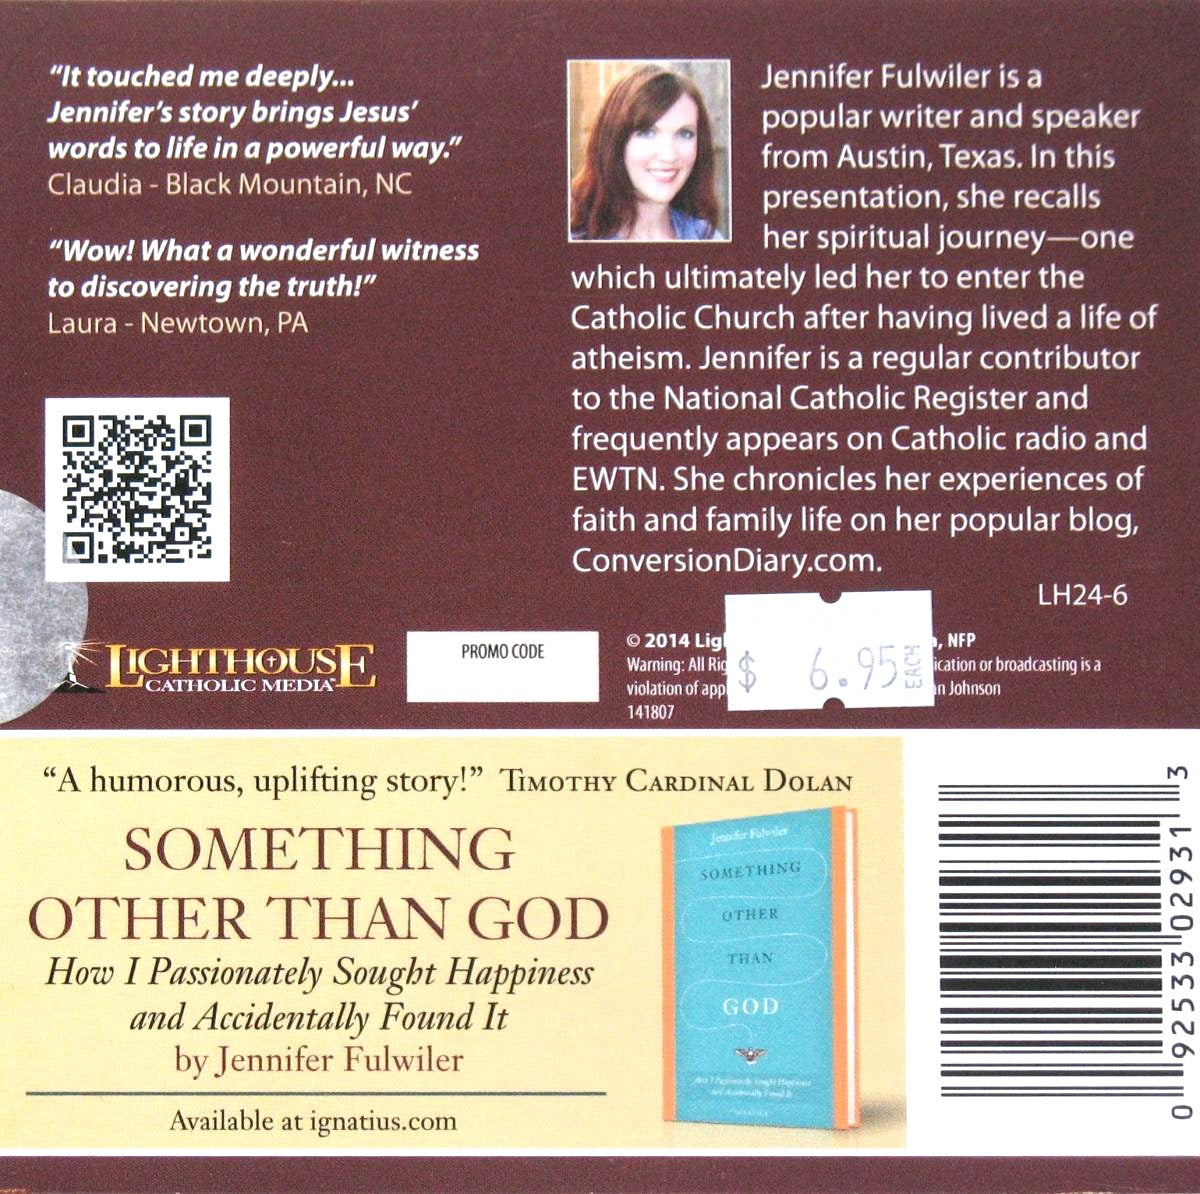 From Atheism to Catholicism - My Conversion Diary - CD Talk by Jennifer Fulwiler